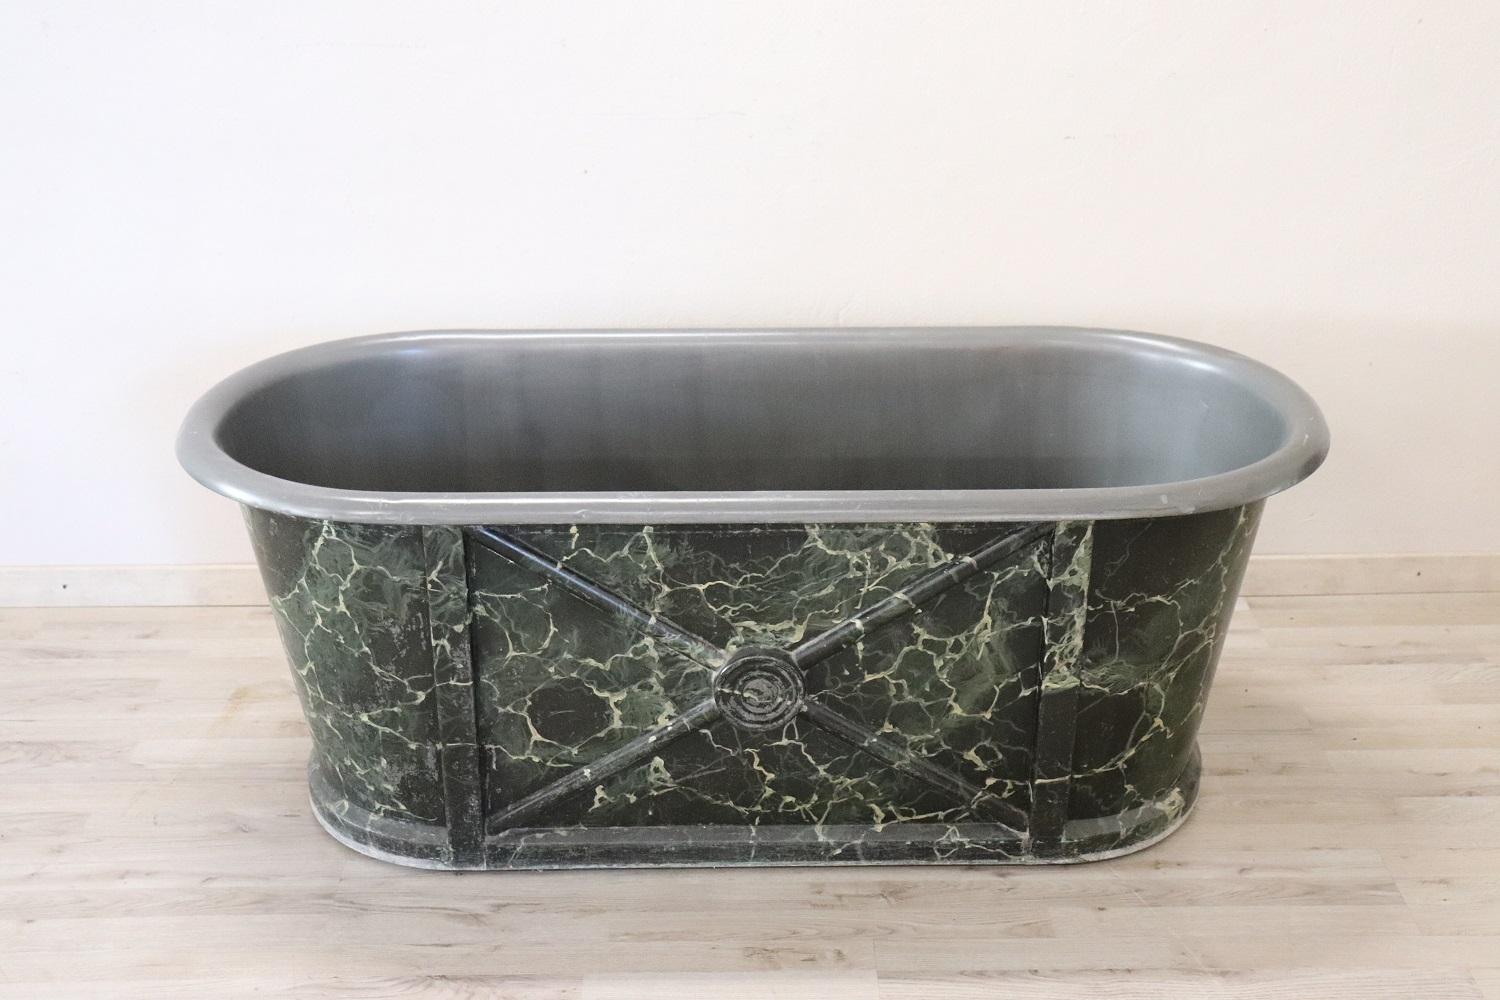 Rare antique bathtub Napoleon's Italian Empire, 1800s in galvanized sheet with hand painted faux marble decorations. The bathtub is presented to you as we found it with all the fascinating signs of the time. This item is really special and rare